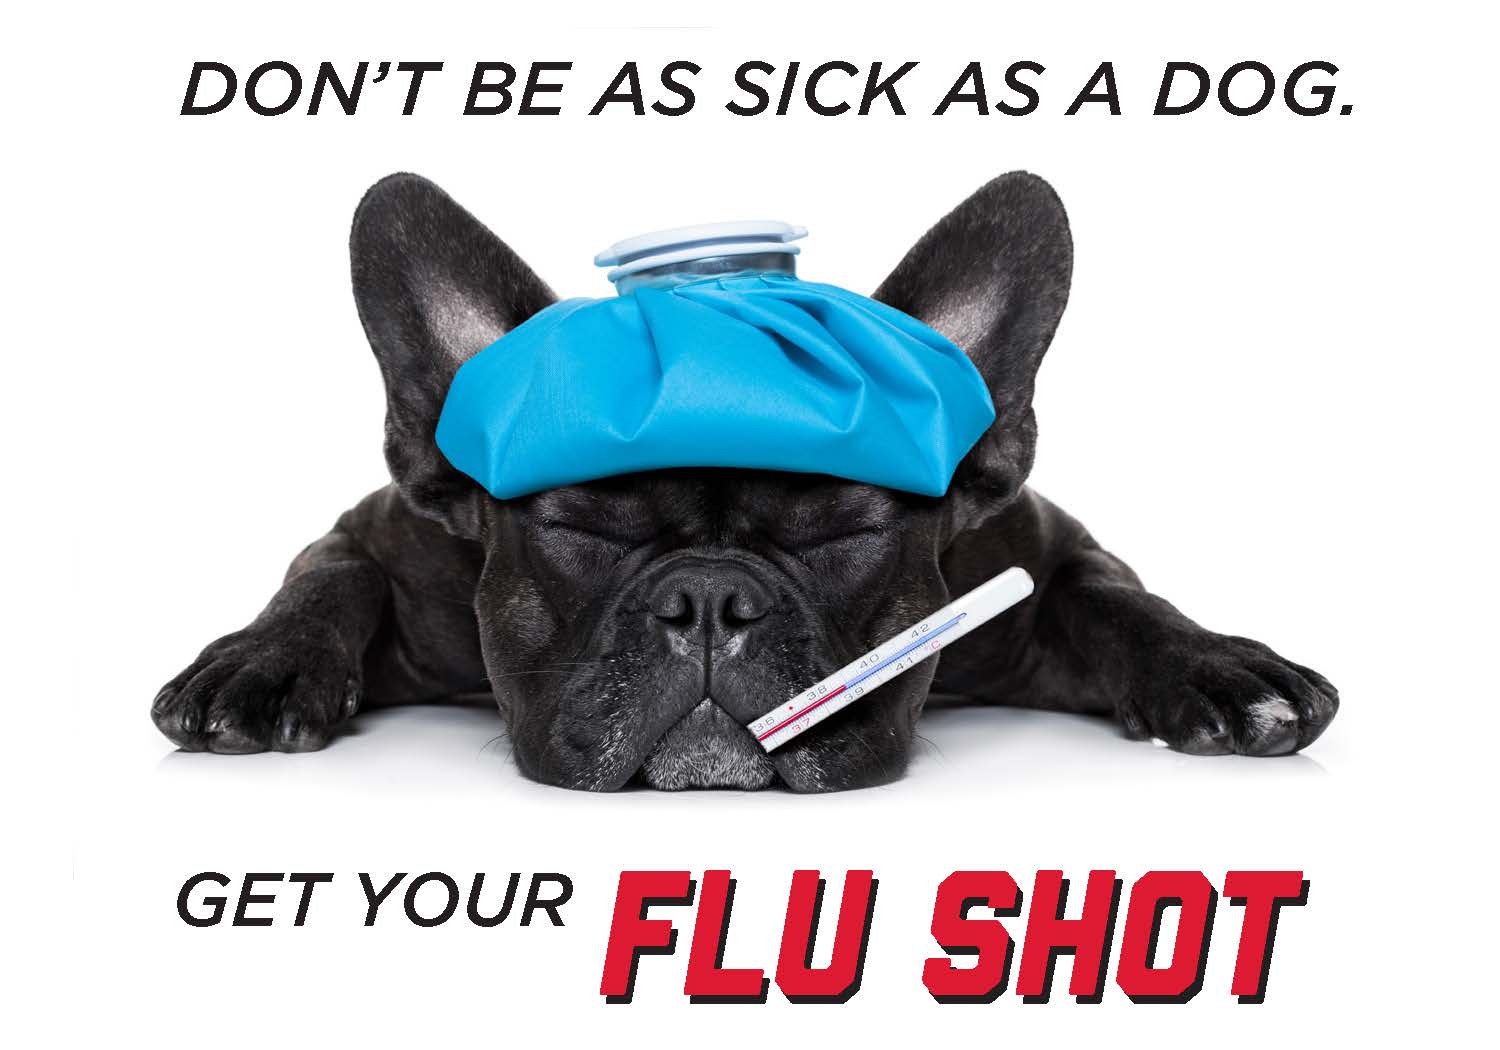 free-flu-shots-are-now-available-at-the-health-center-announce